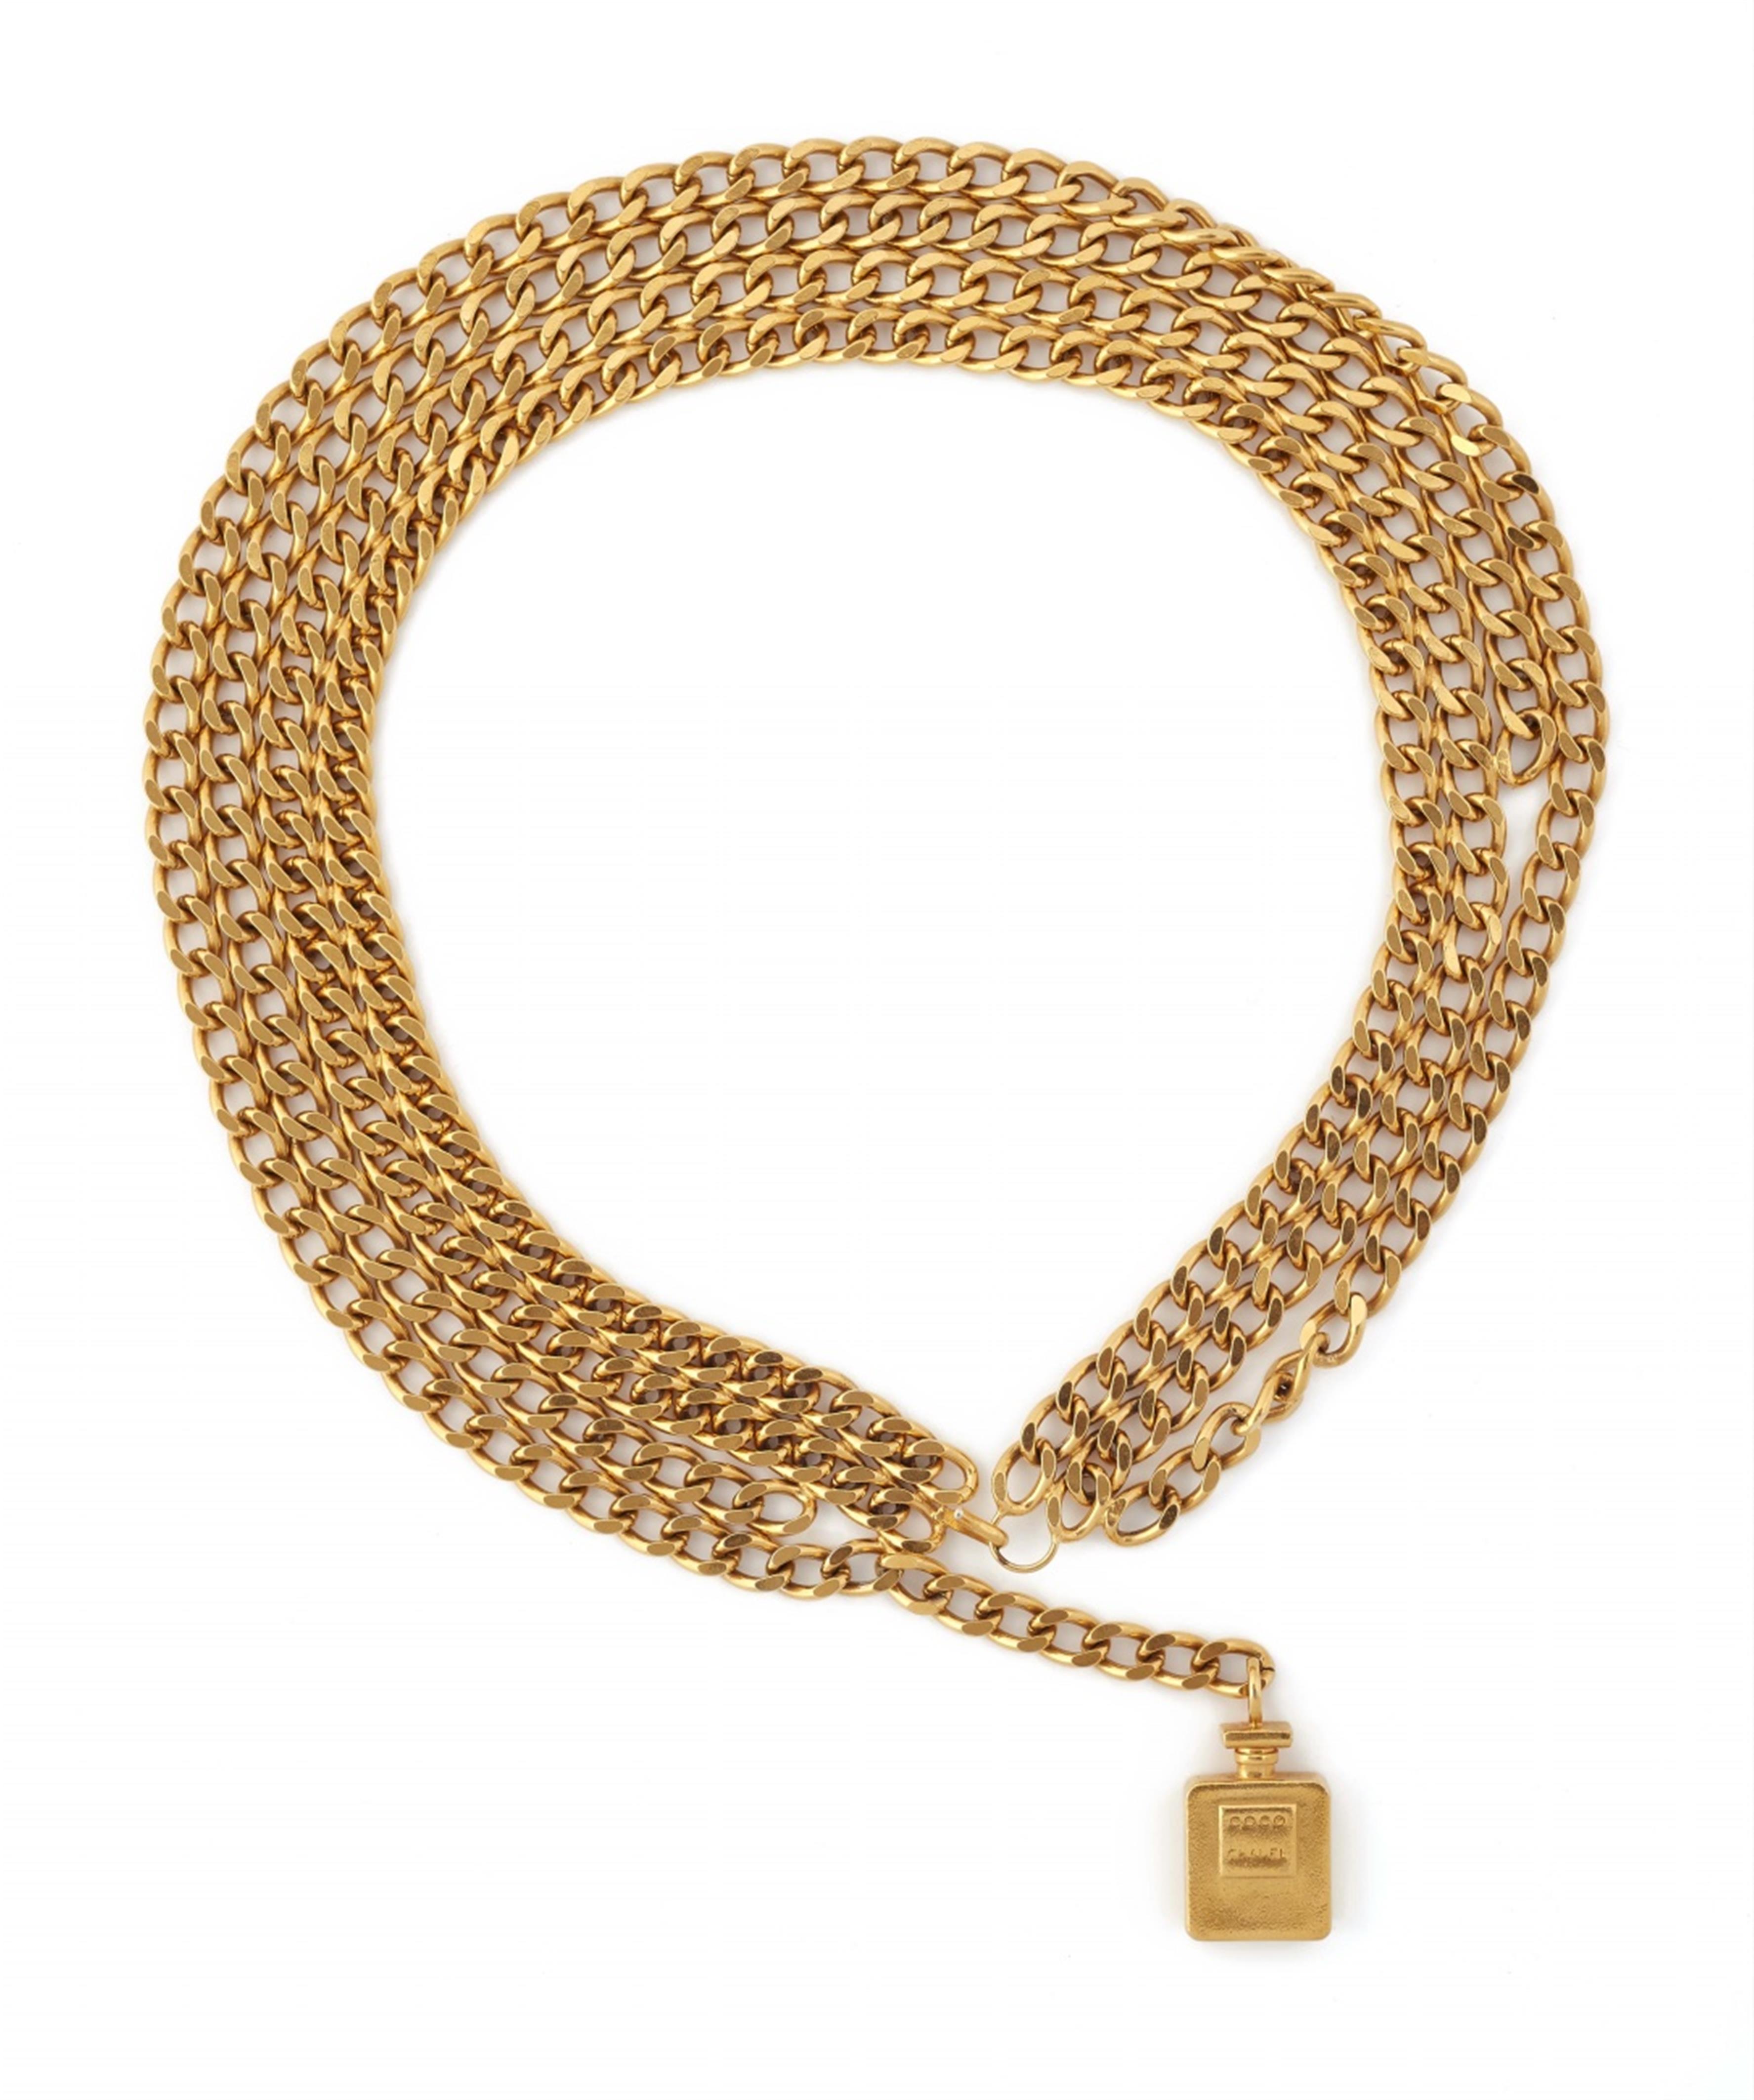 A Chanel chain belt with a perfume bottle charm, Autumn 1982 - Lot 87